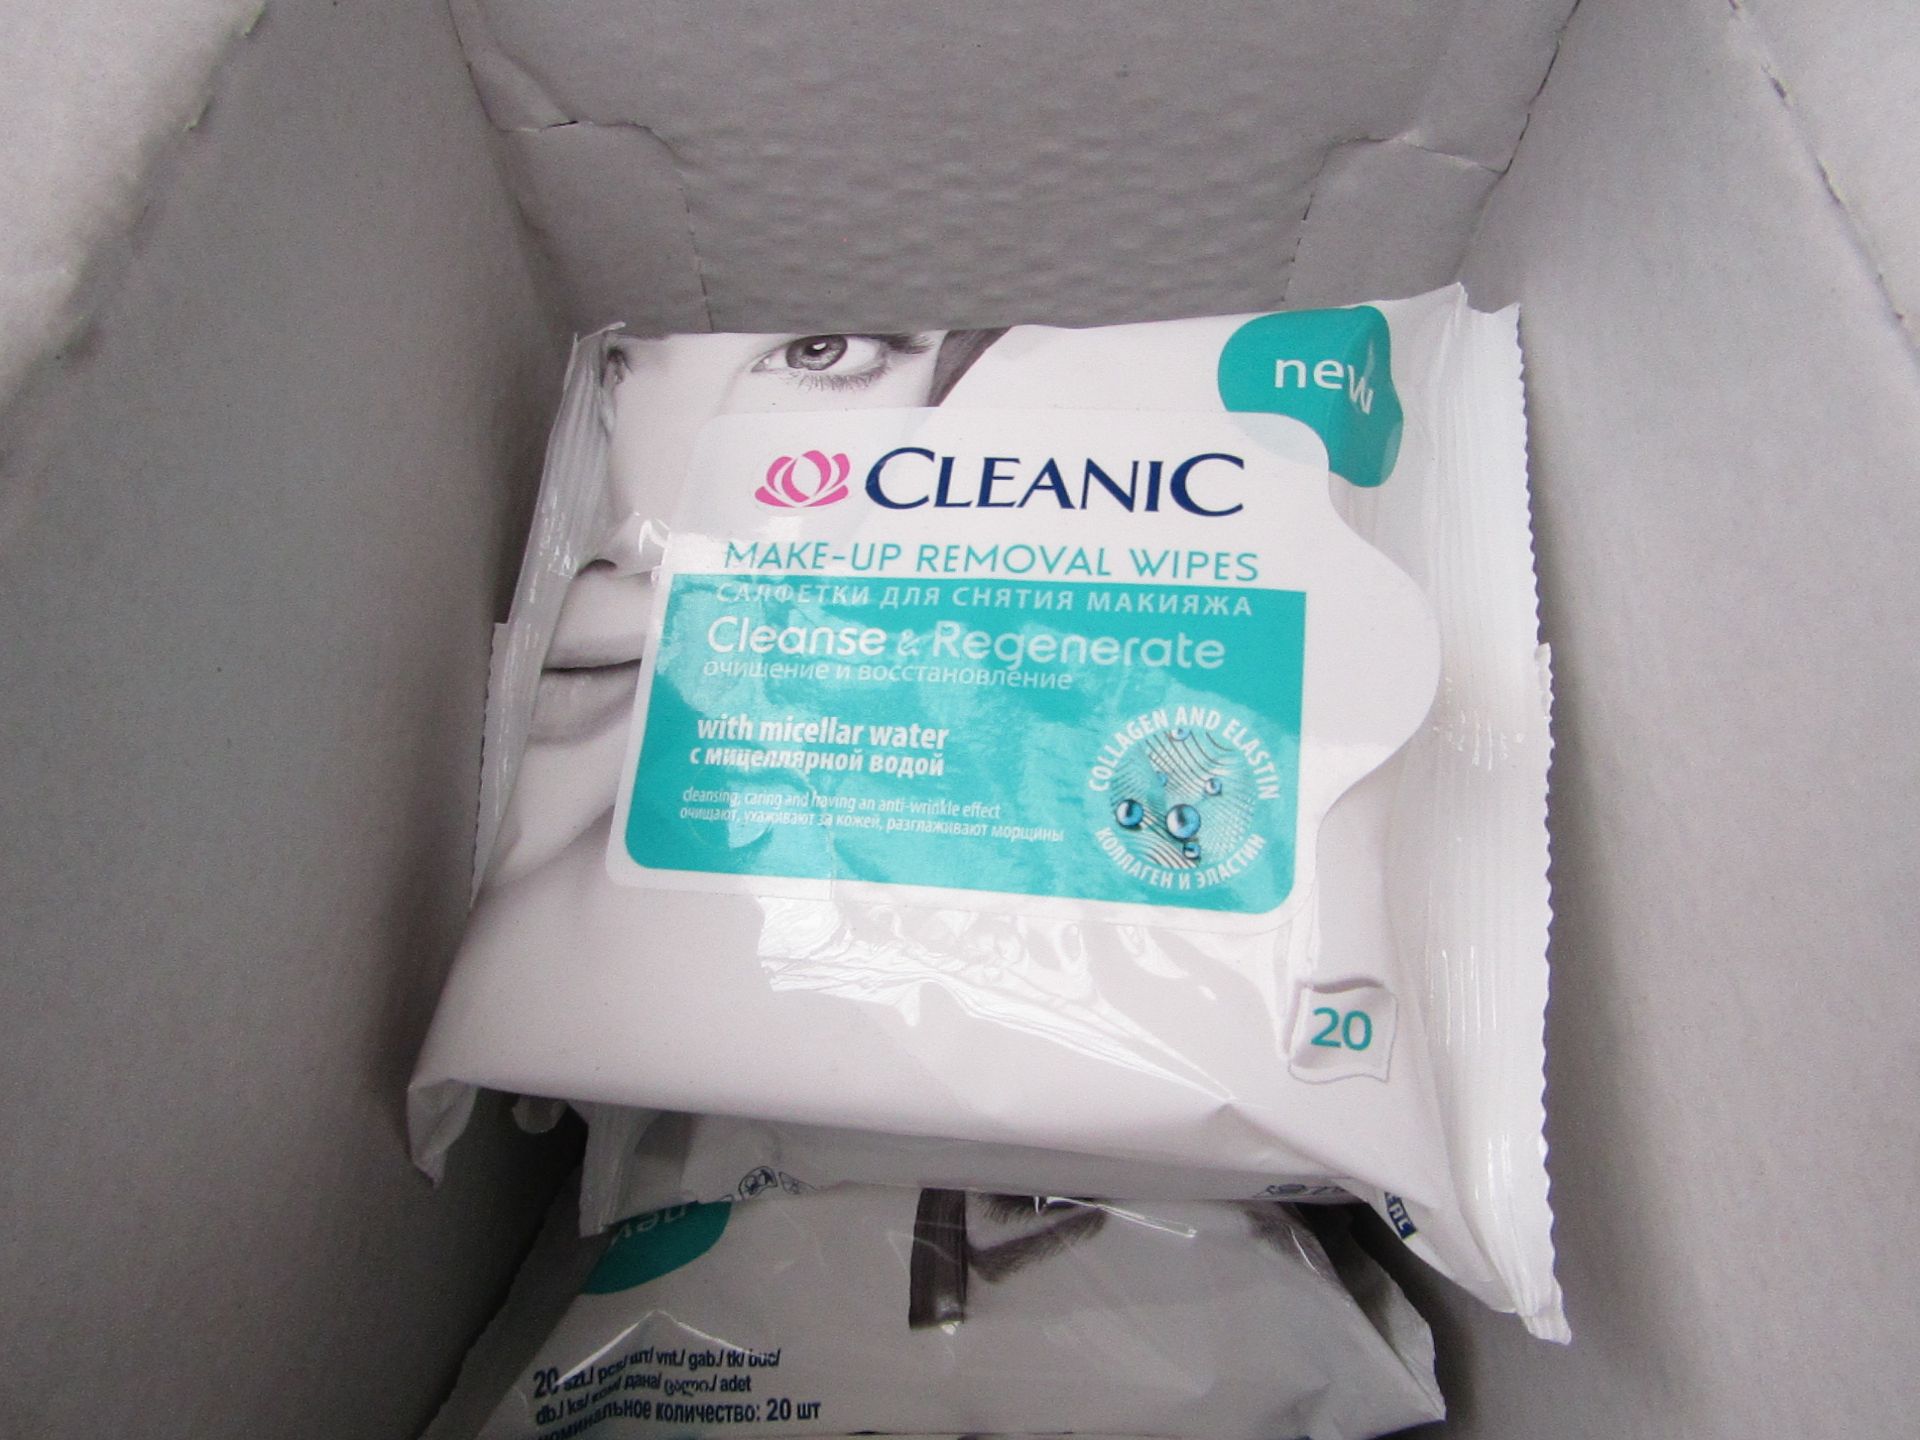 6x Cleanic - Wipes Cleanse & Regenerate - Packaged and Boxed.